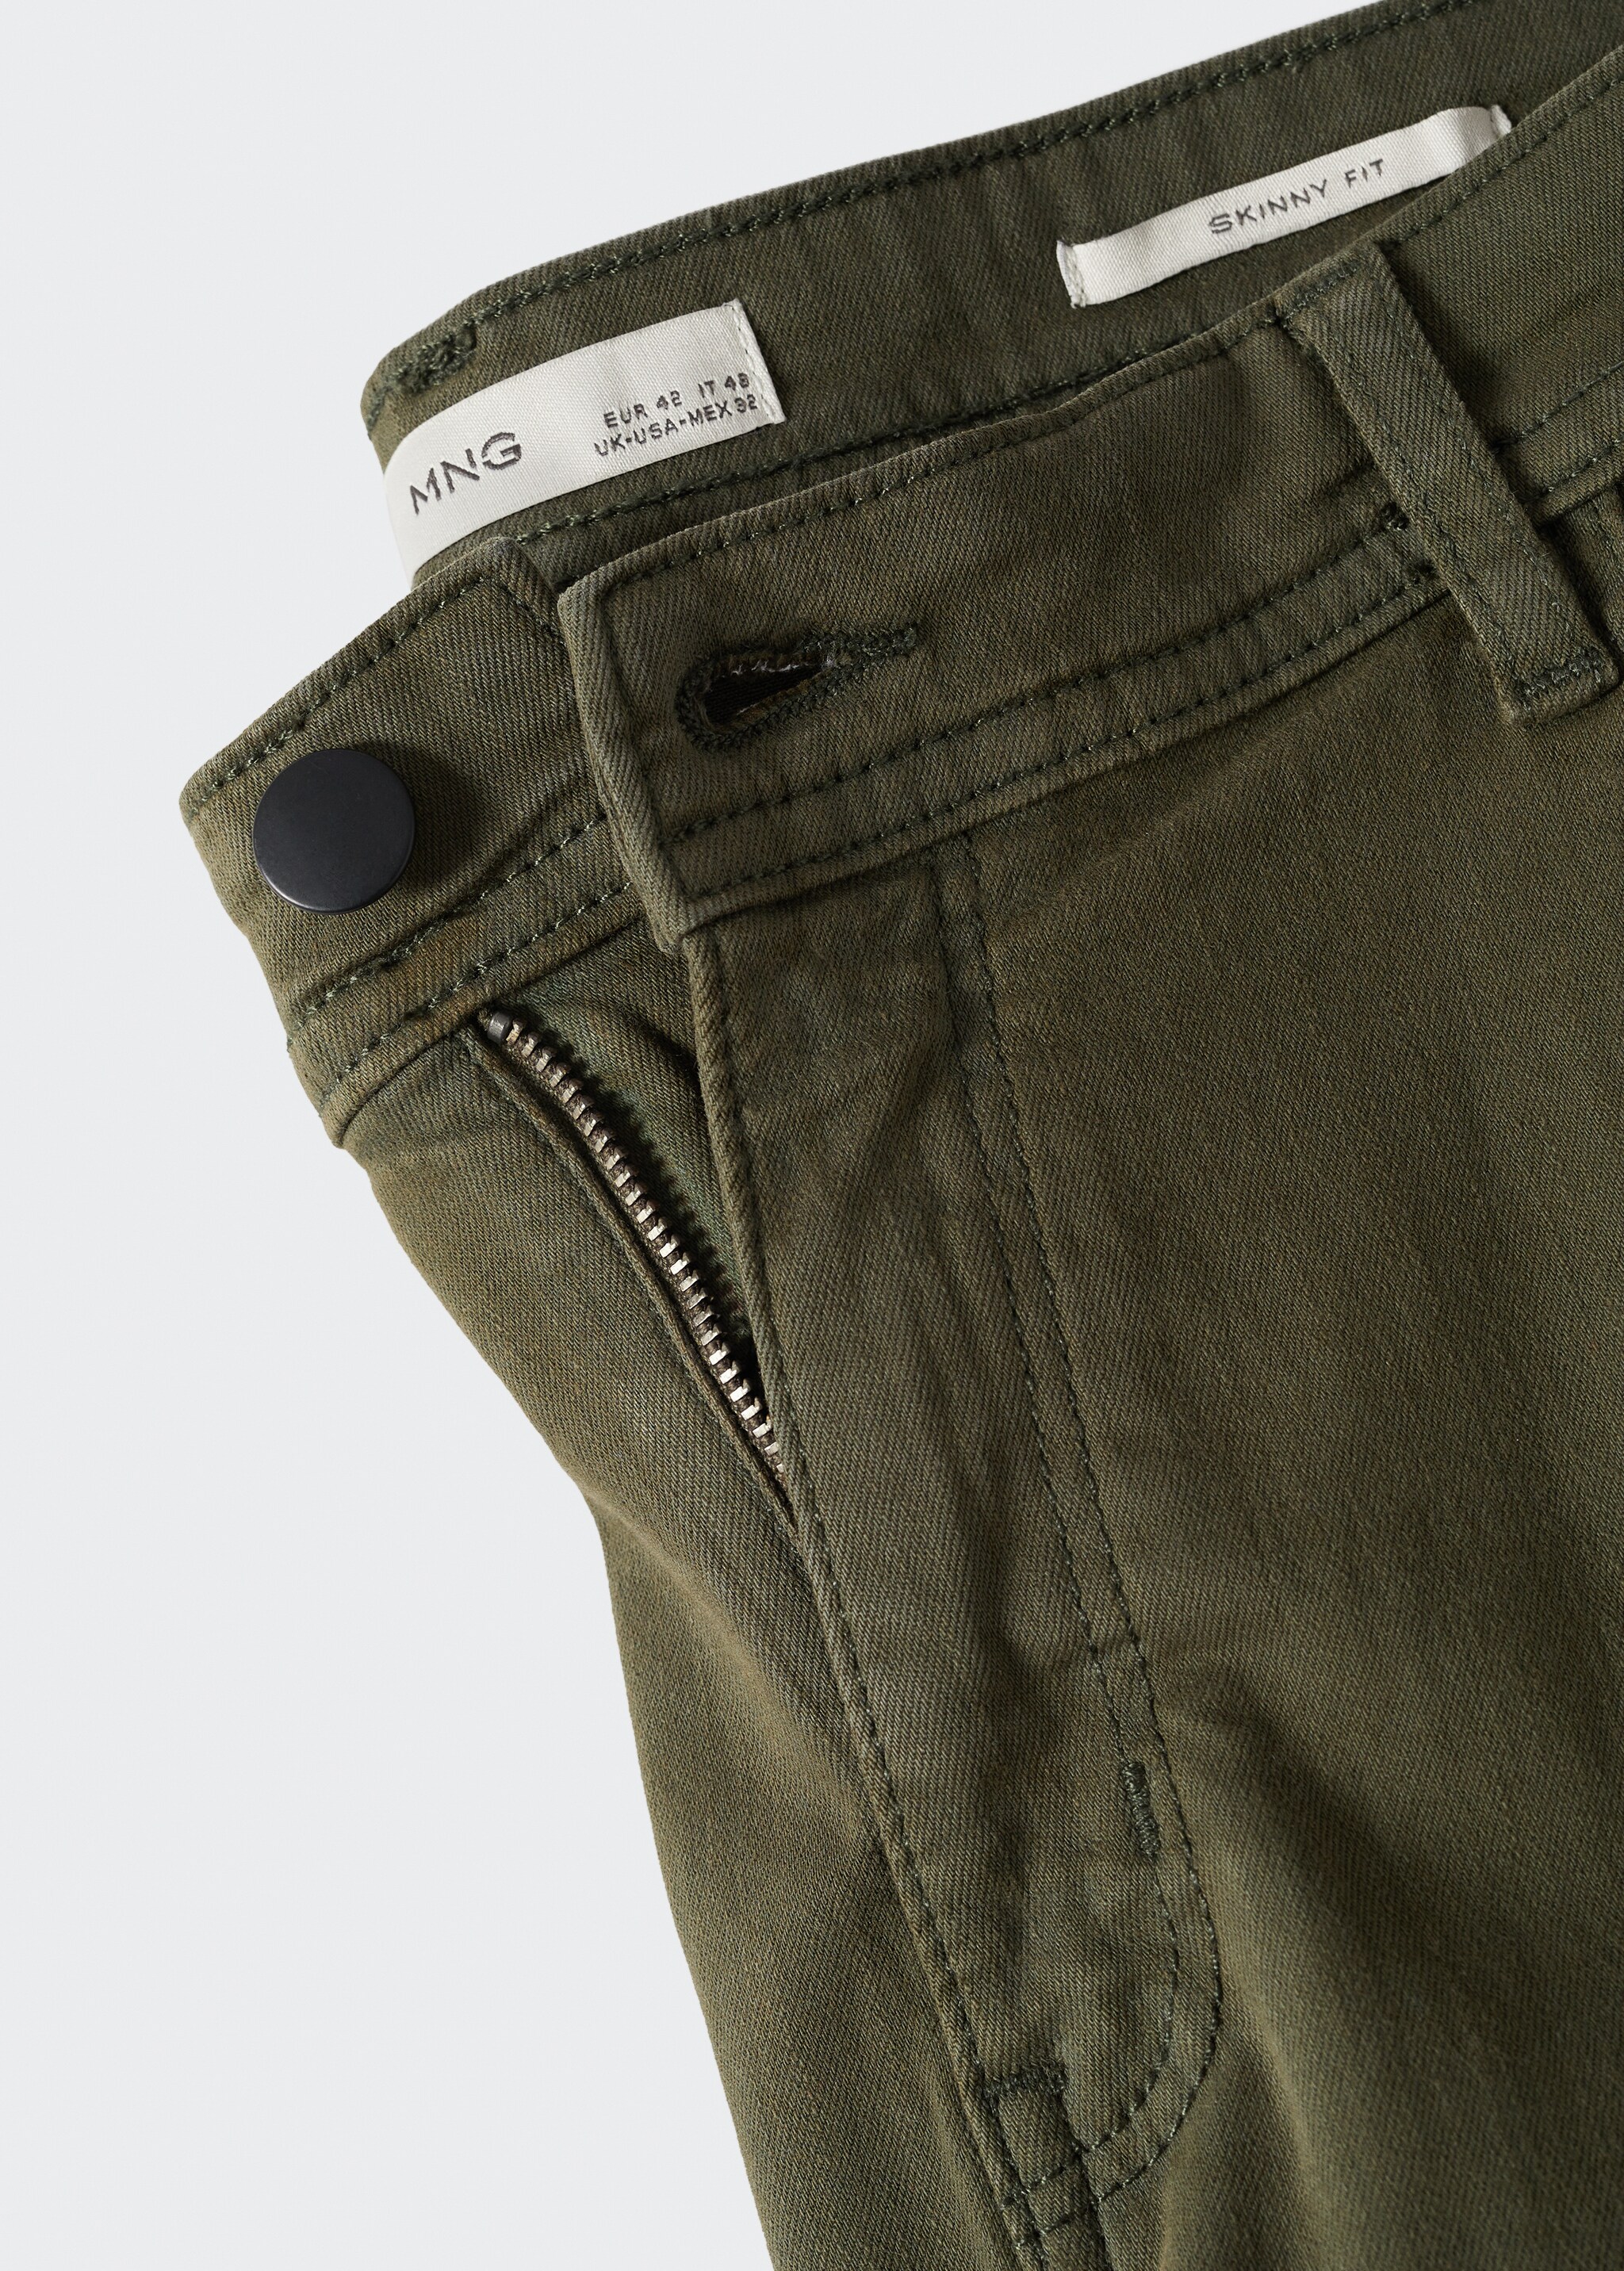 Colour skinny jeans - Details of the article 8